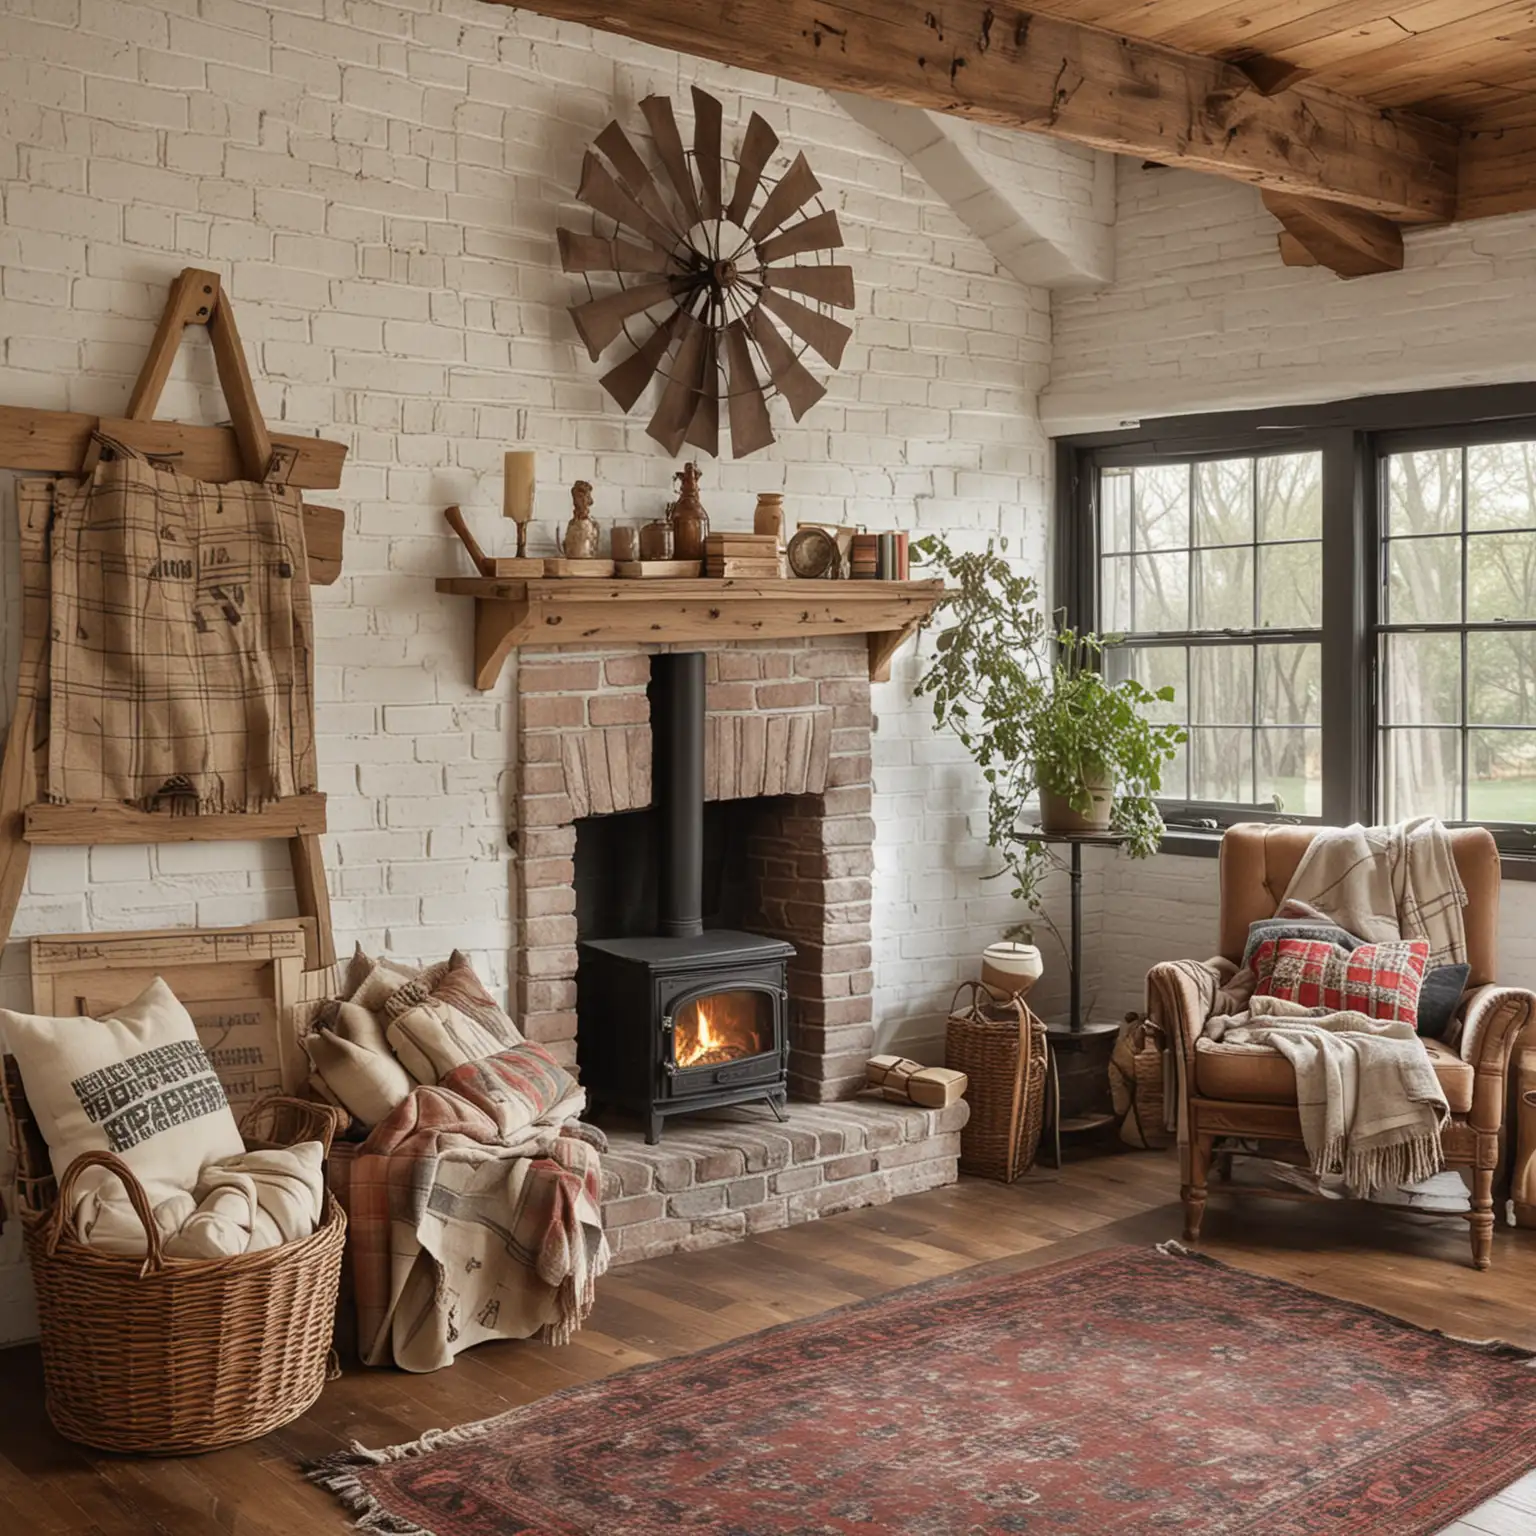 Cozy Retreat: A wide shot large and spacious but cozy farmhouse living room with whitewashed brick walls and a wood-burning stove. The room features a comfy loveseat with plaid throw pillows, a reclaimed wood bookshelf filled with vintage books and trinkets, and a round rug. Windows with wooden shutters overlook a lush garden, and a rustic wooden door with an iron handle adds character. A wicker basket filled with firewood sits by the stove, and a metal wall decor piece in the shape of a windmill adds a farmhouse touch. A wooden ladder with cozy blankets is propped against the wall.